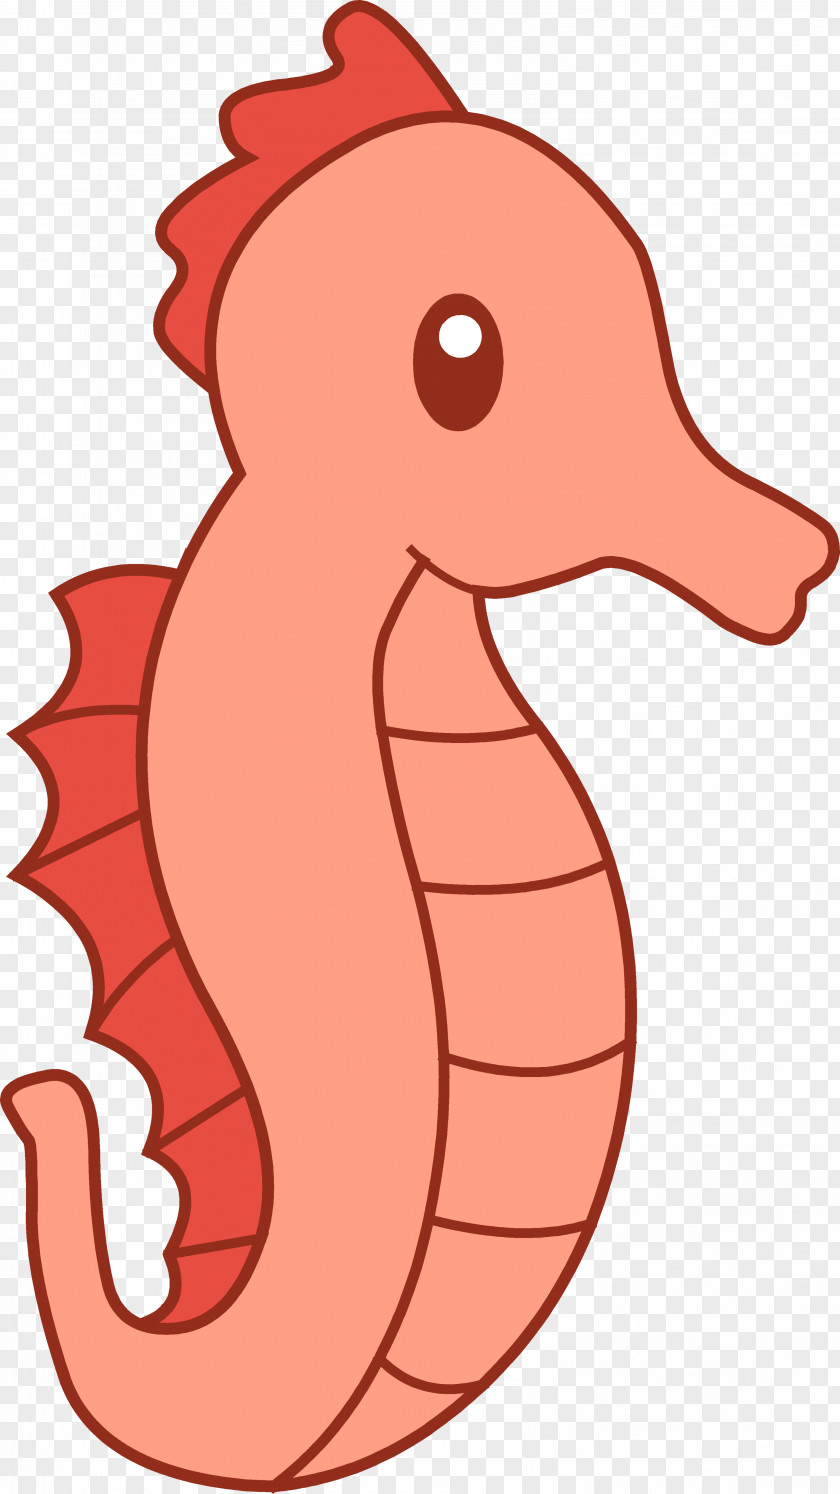 Cute Seahorse Image Free Content Clip Art PNG